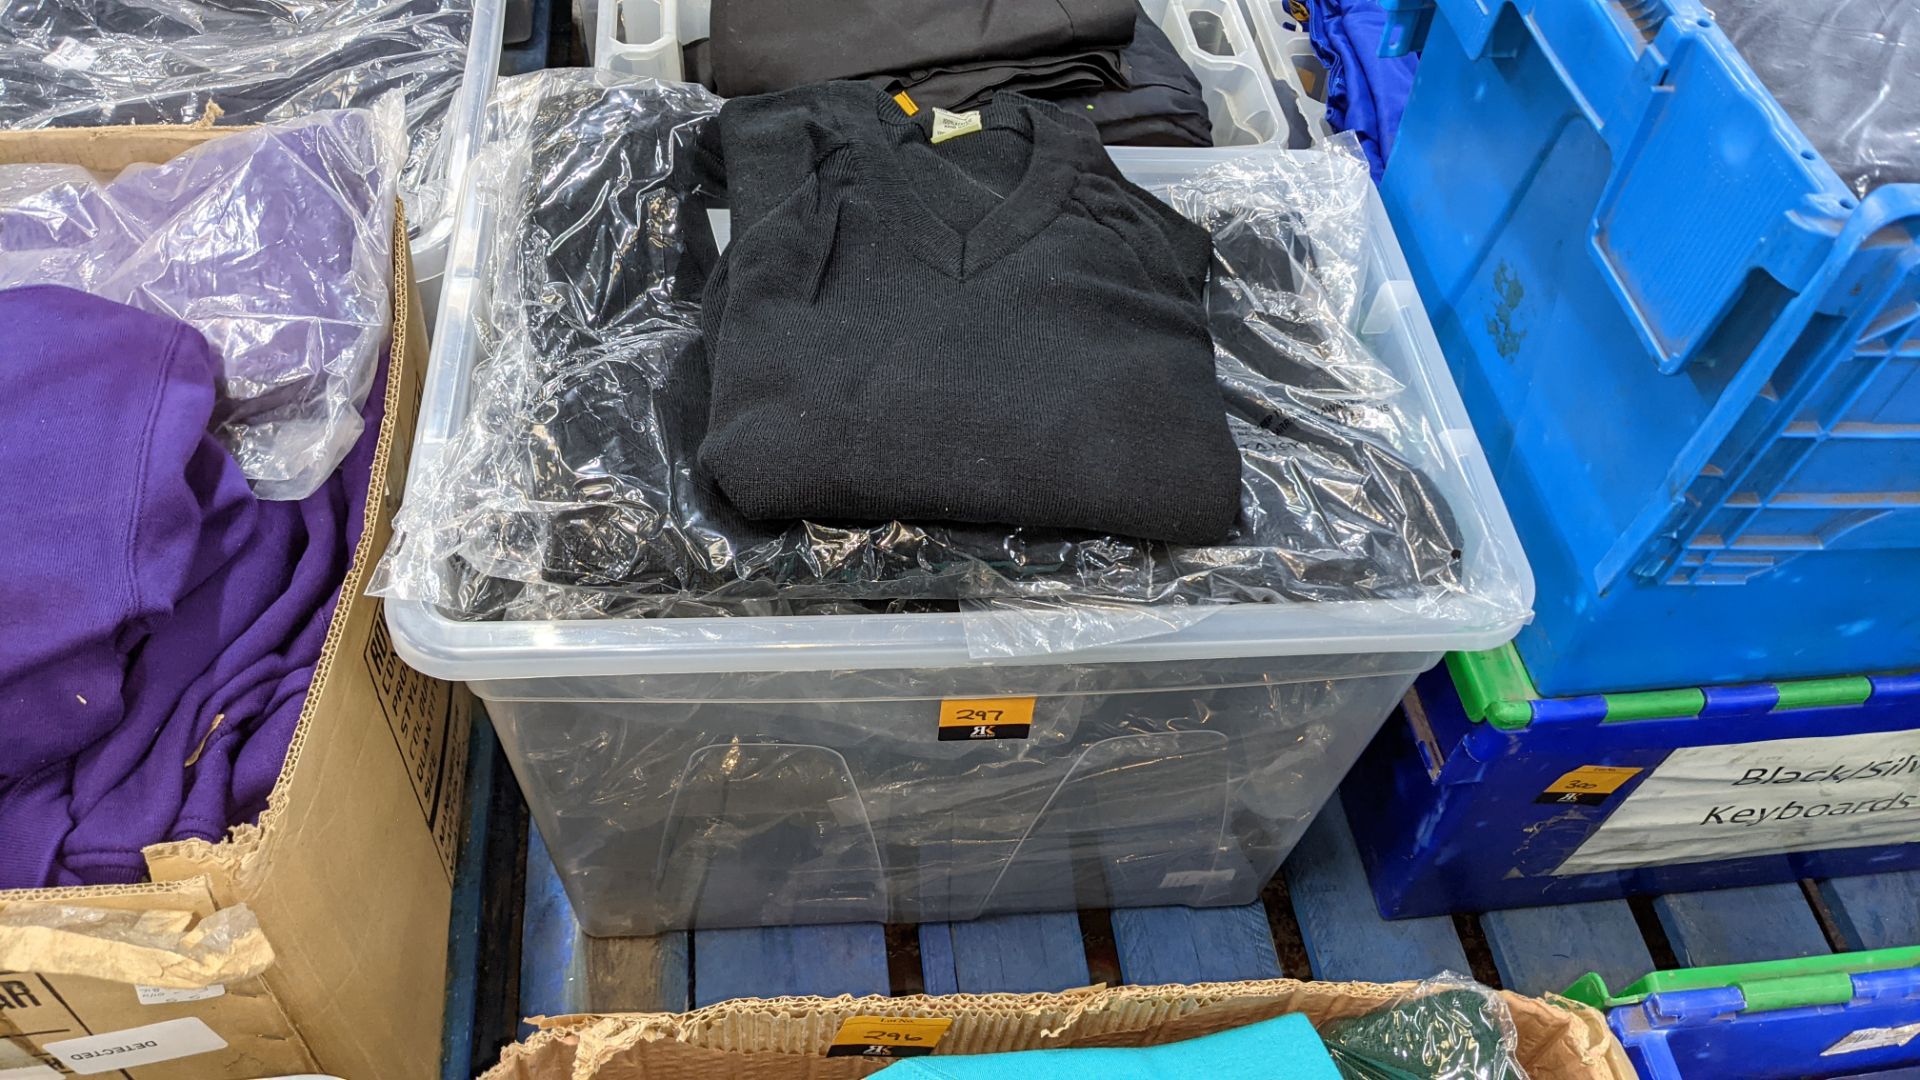 Approx 15 off children's black V neck jumpers - the contents of 1 large crate. NB crate excluded